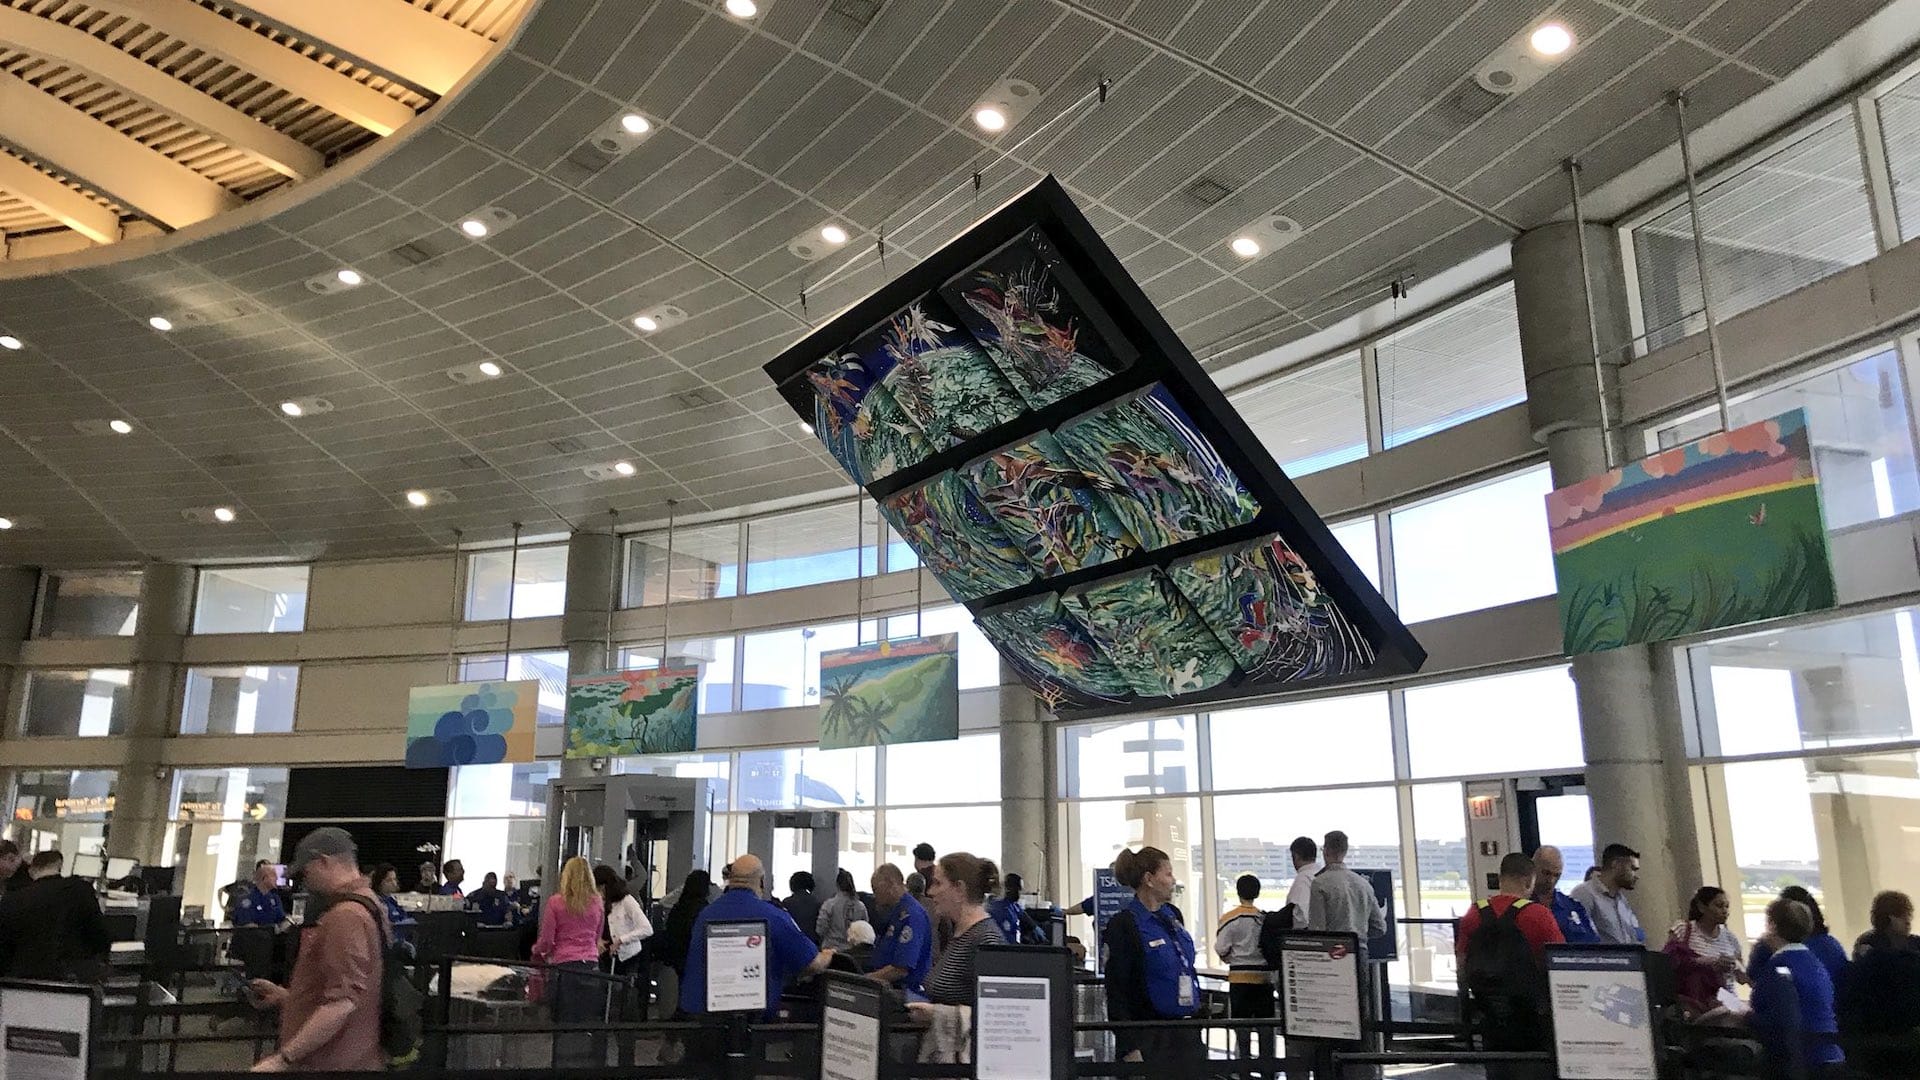 A large mosaic is positioned from the rafters as airport passengers pass through a terminal